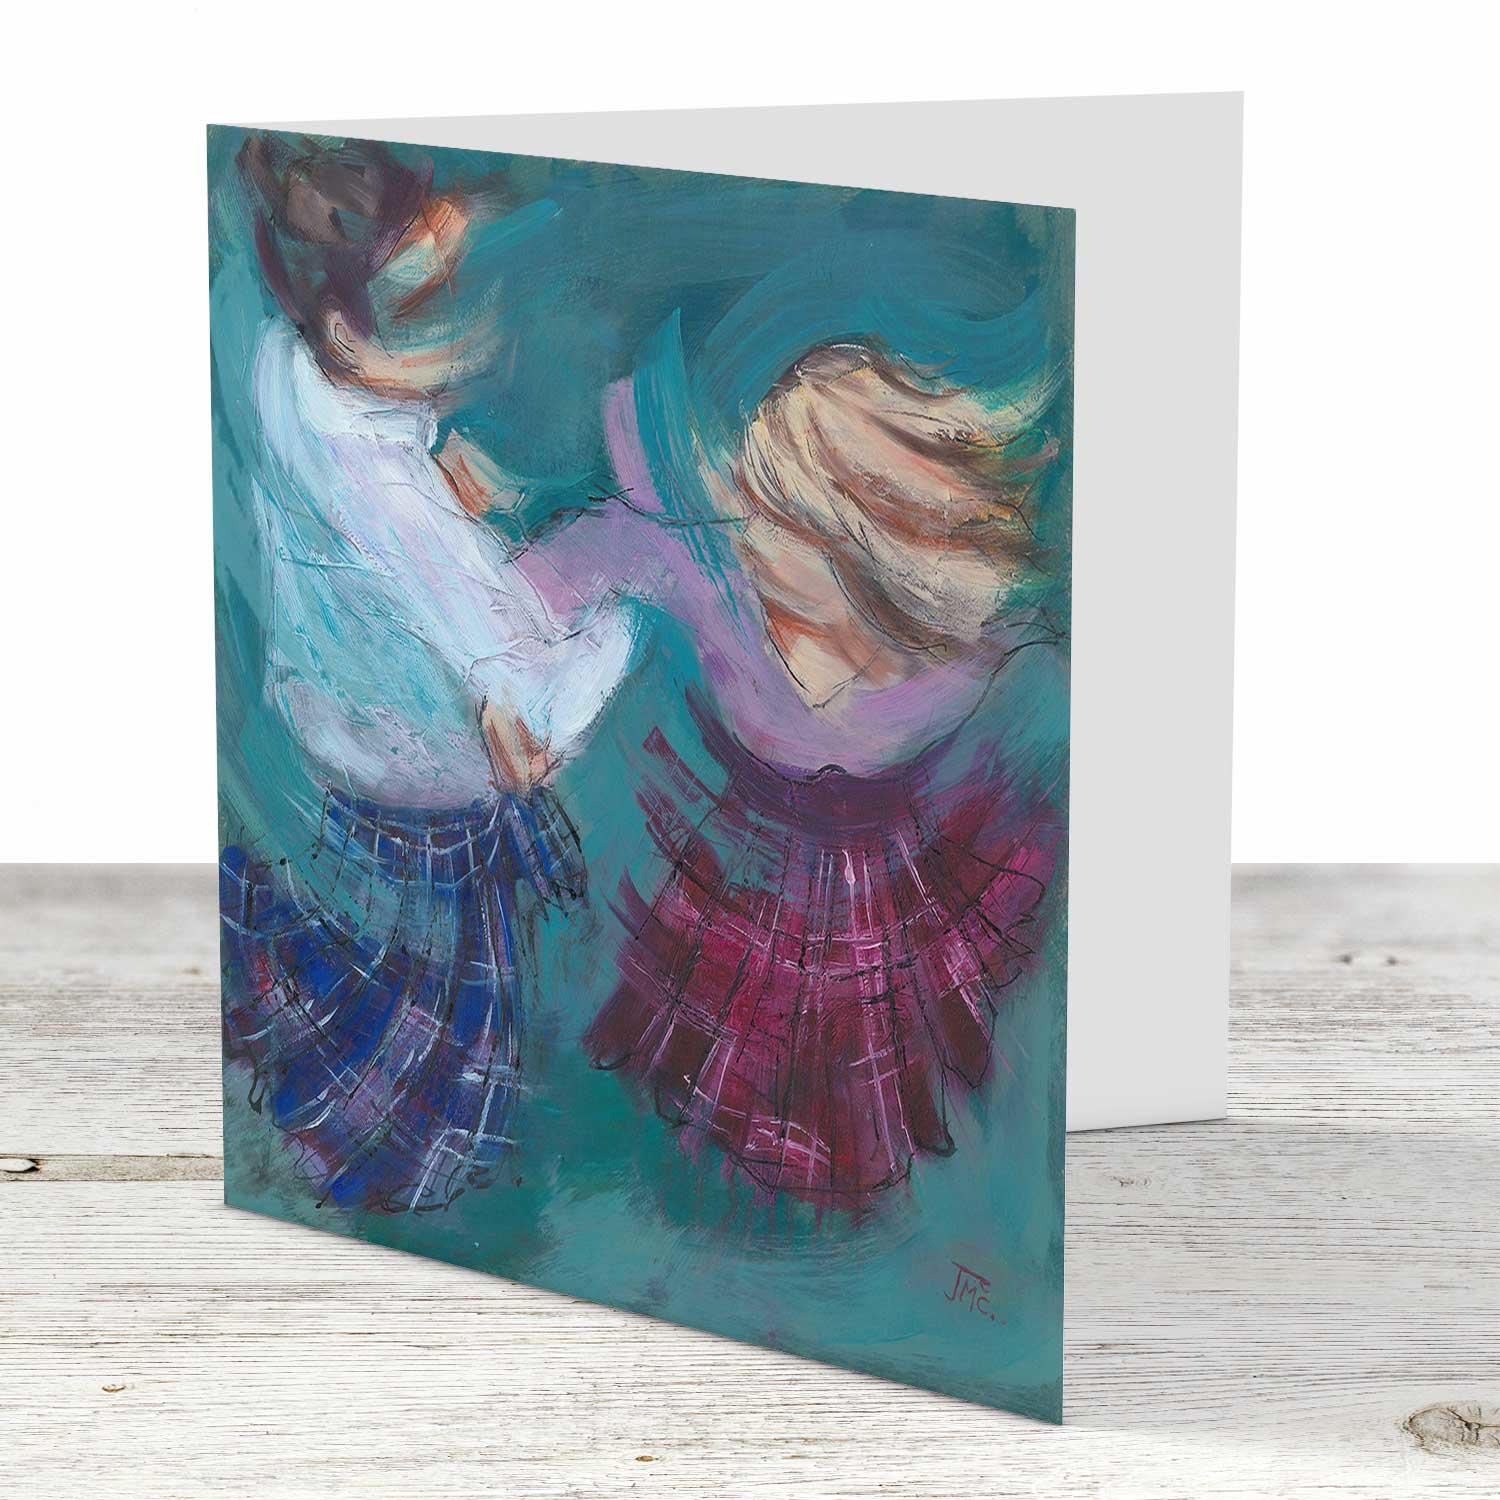 Spin Greeting Card from an original painting by artist Janet McCrorie